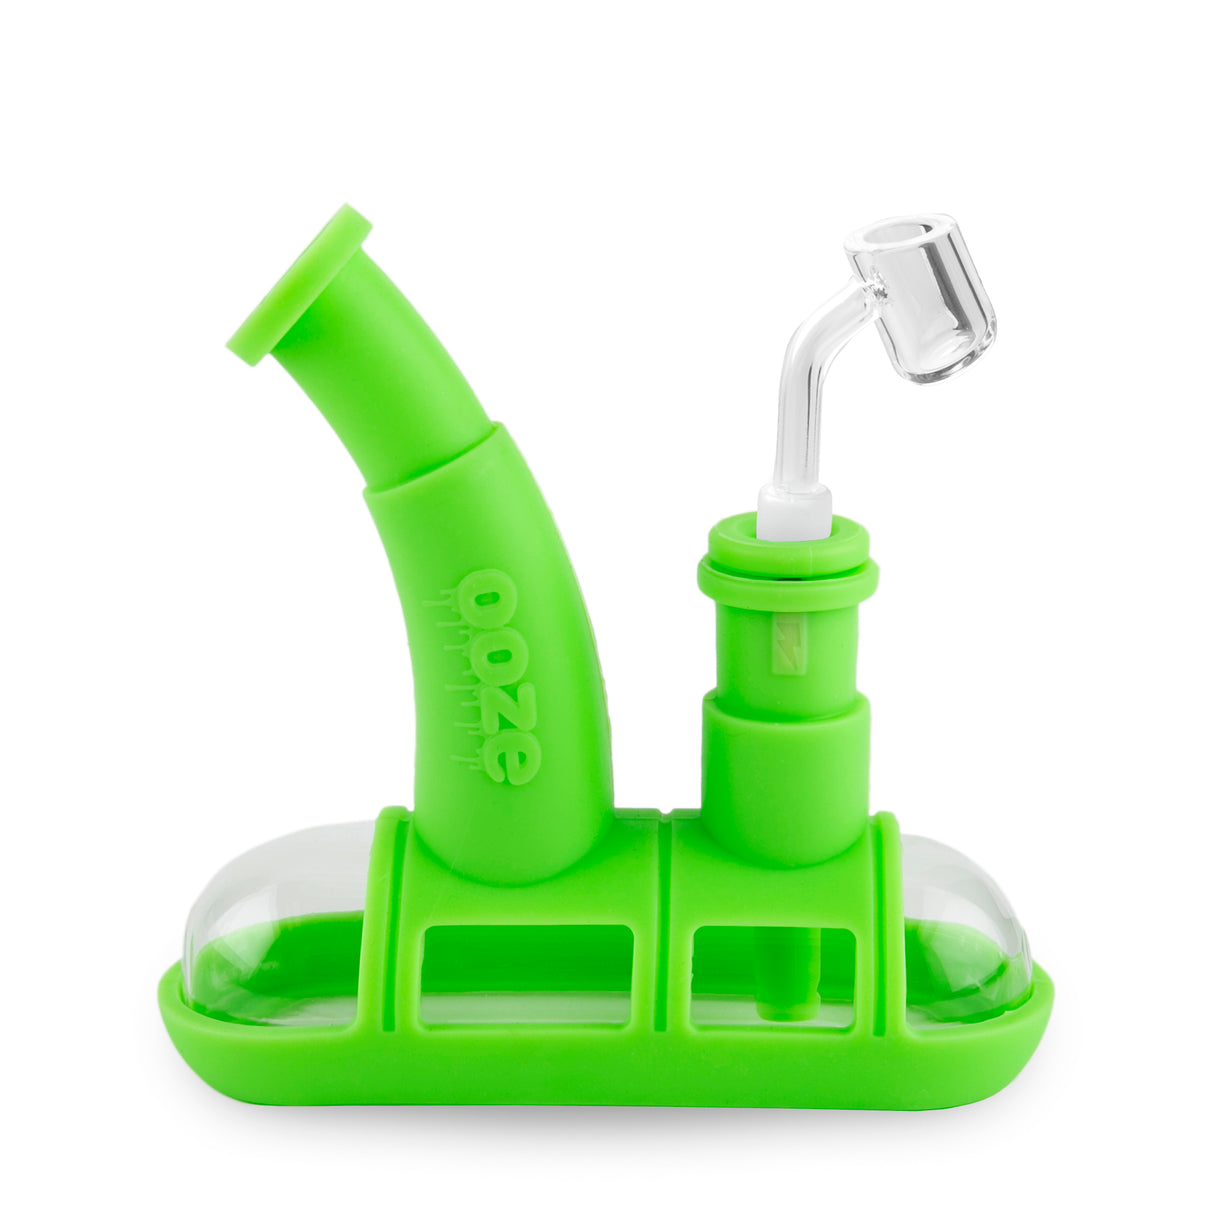 Ooze Steamboat Silicone Water Bubbler & Dab Rig - Slime Green